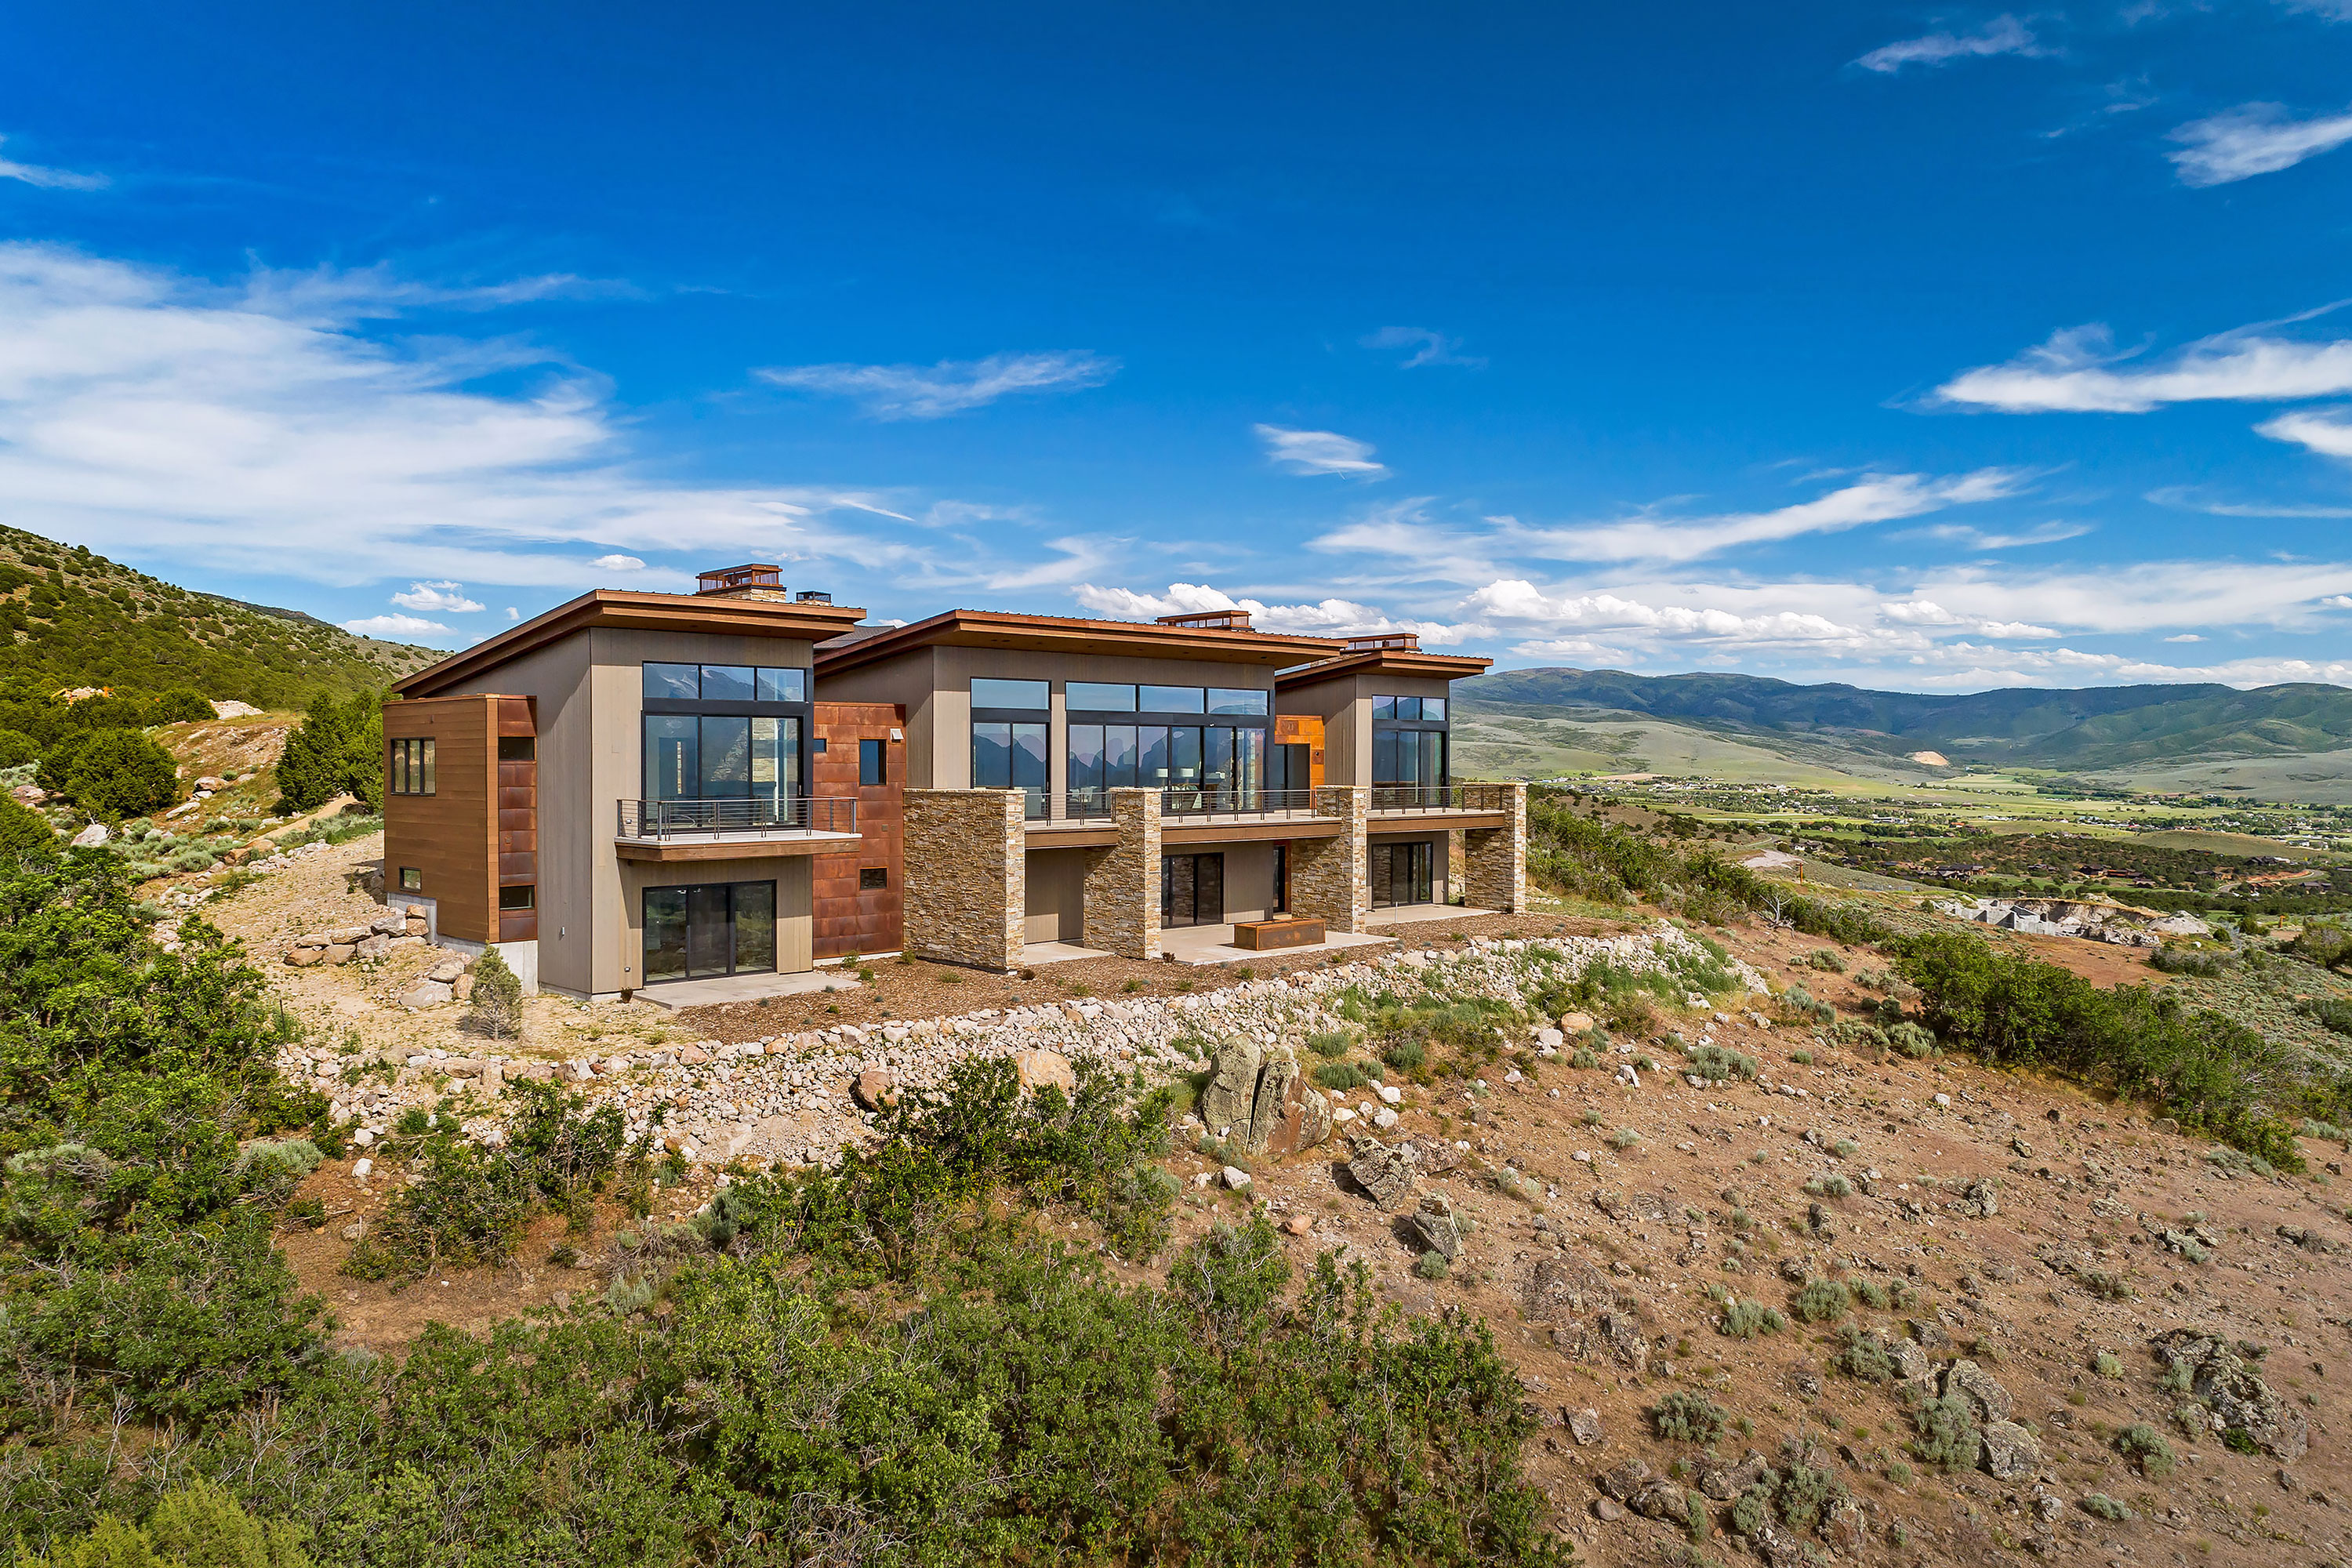 Private Residence - Heber City, Utah. Aerial Photography by Alan Blakely.